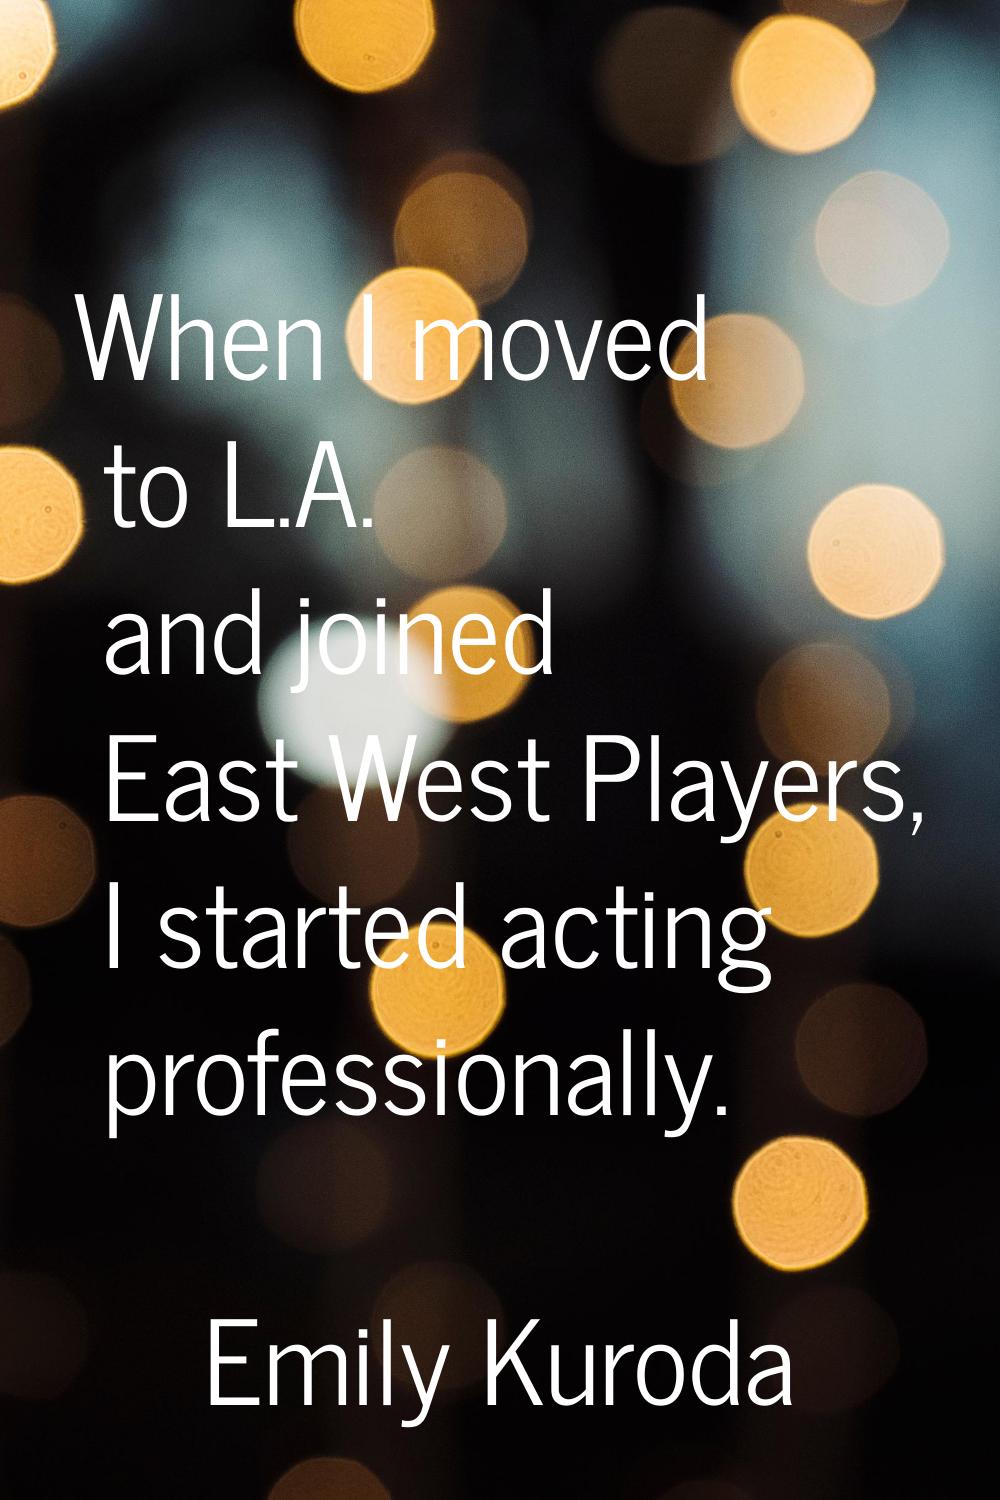 When I moved to L.A. and joined East West Players, I started acting professionally.